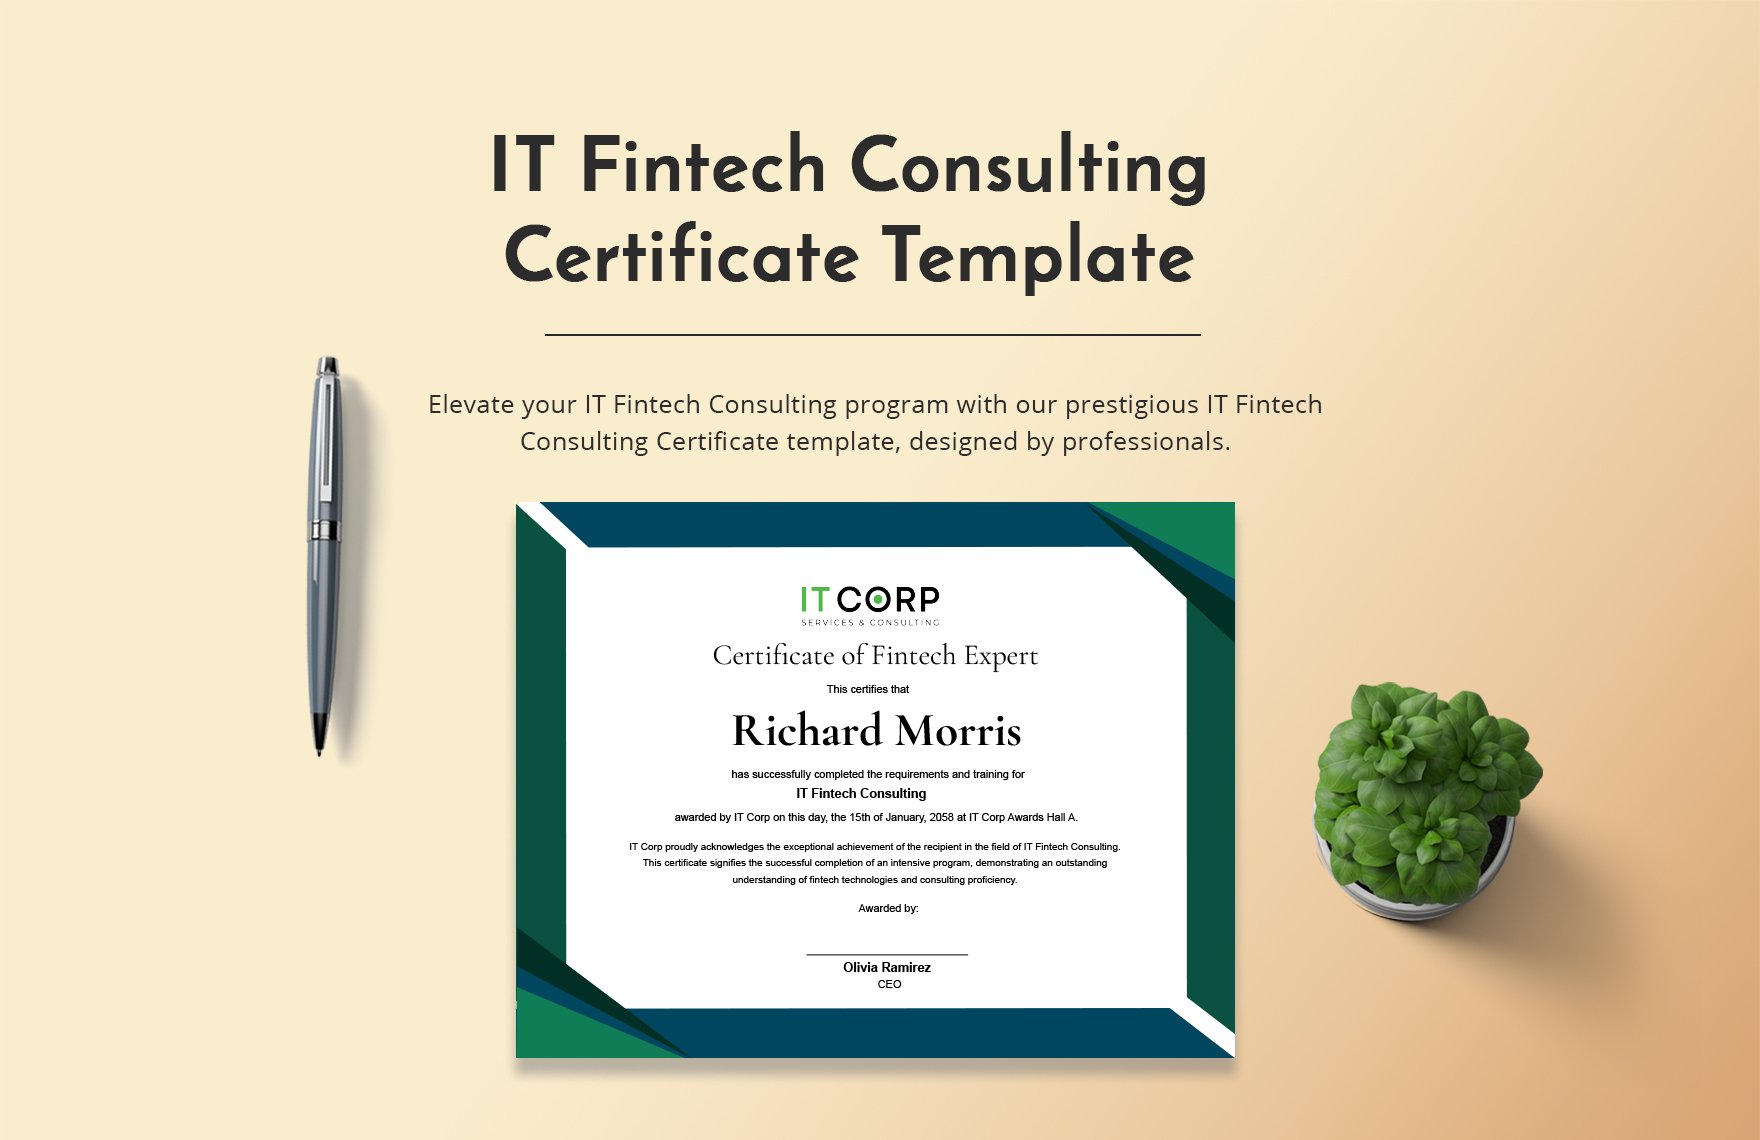 IT Fintech Consulting Certificate Template